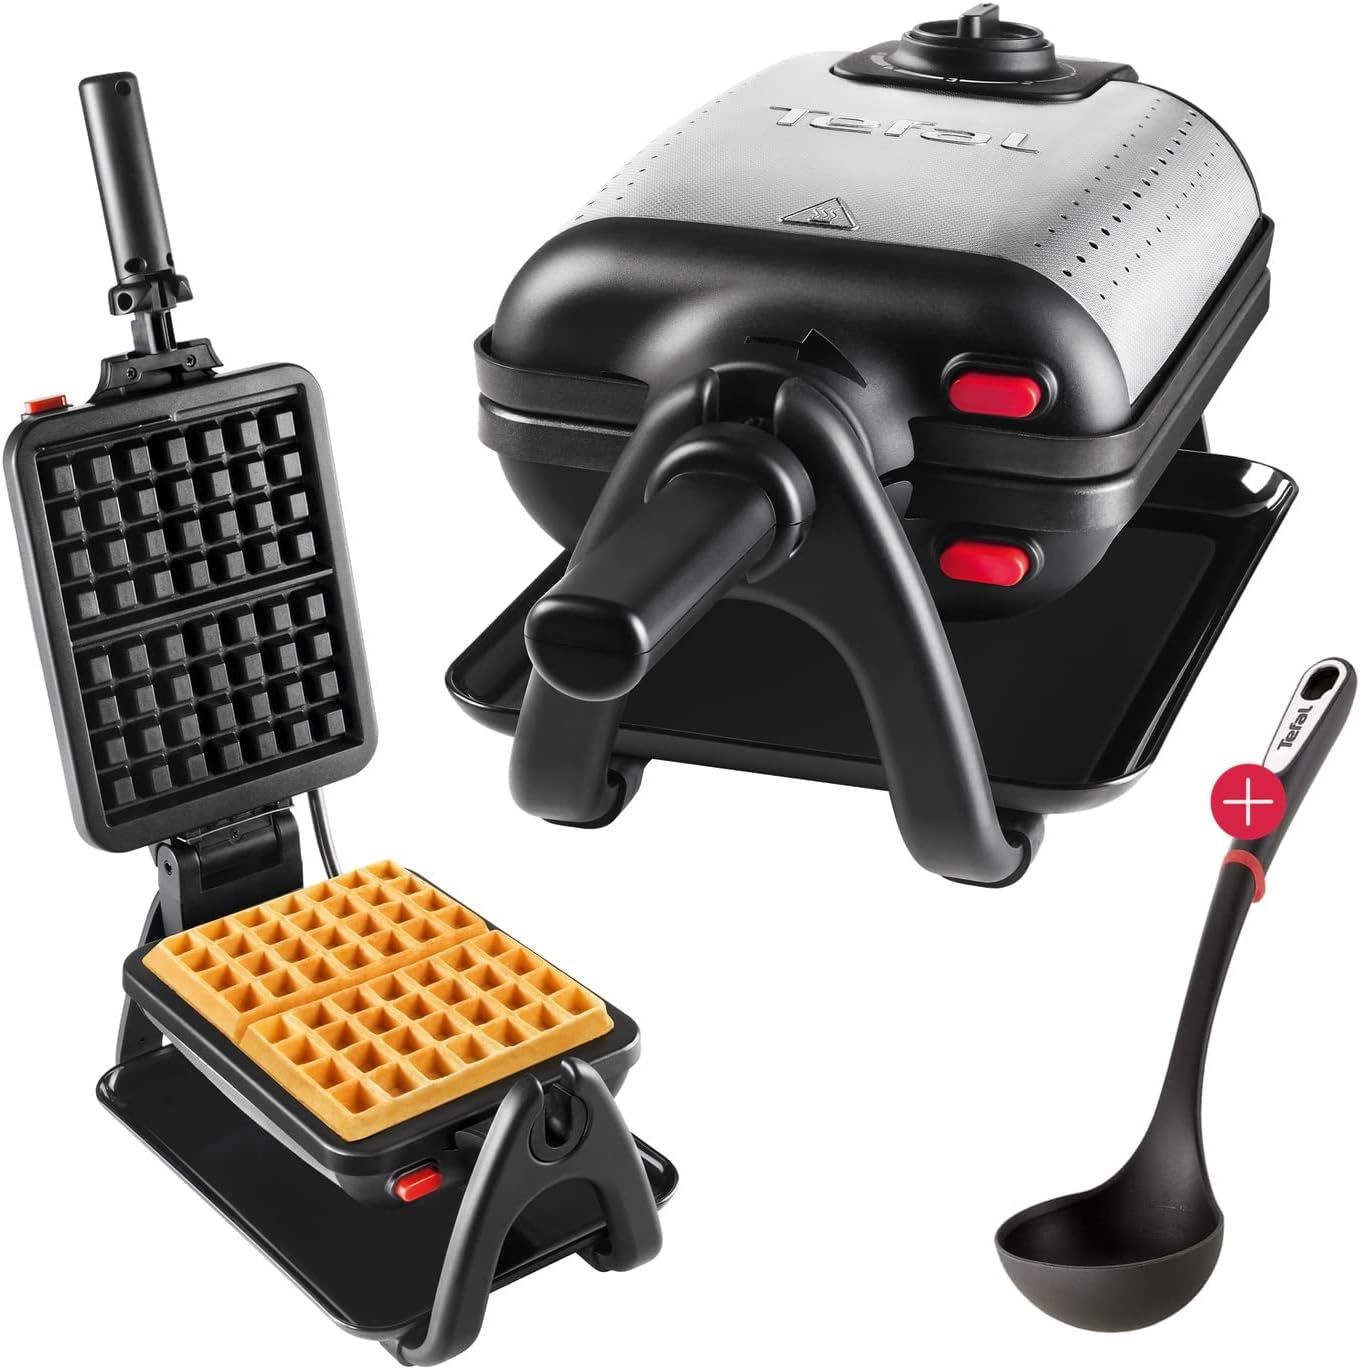 Tefal Professional King Size Waffle Iron, 1200 Watt, Rotating Double Waffle Iron for 2 Belgian Thick Waffles, Non-Stick Coated Plates, Rotating Function, Temperature Control, Dishwasher Safe Plates